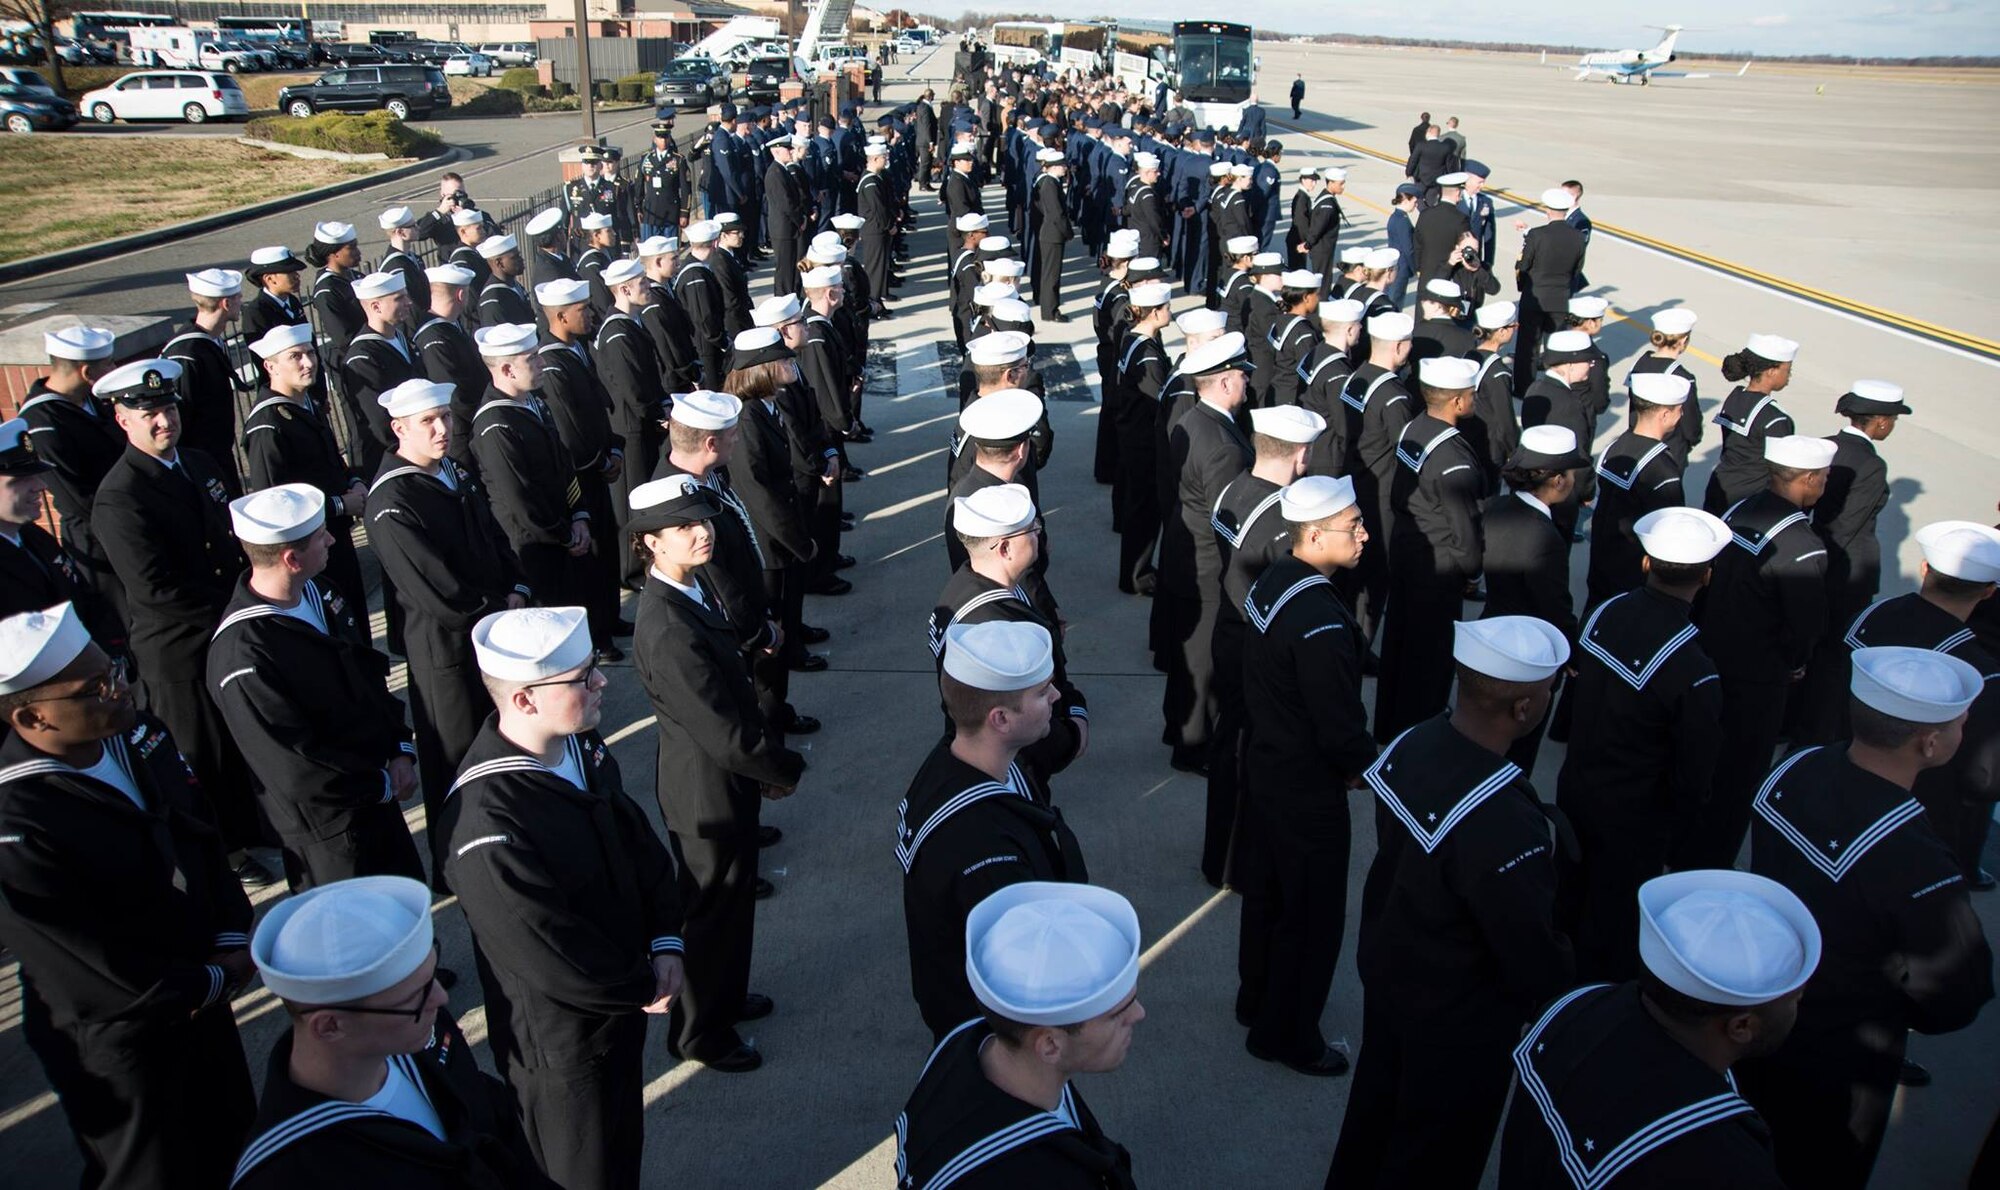 Sailors from the U.S.S. George H.W. Bush (CVN-77) stand at parade rest before the start of George H.W. Bush’s state funeral on Joint Base Andrews, Md., Dec. 3, 2018.